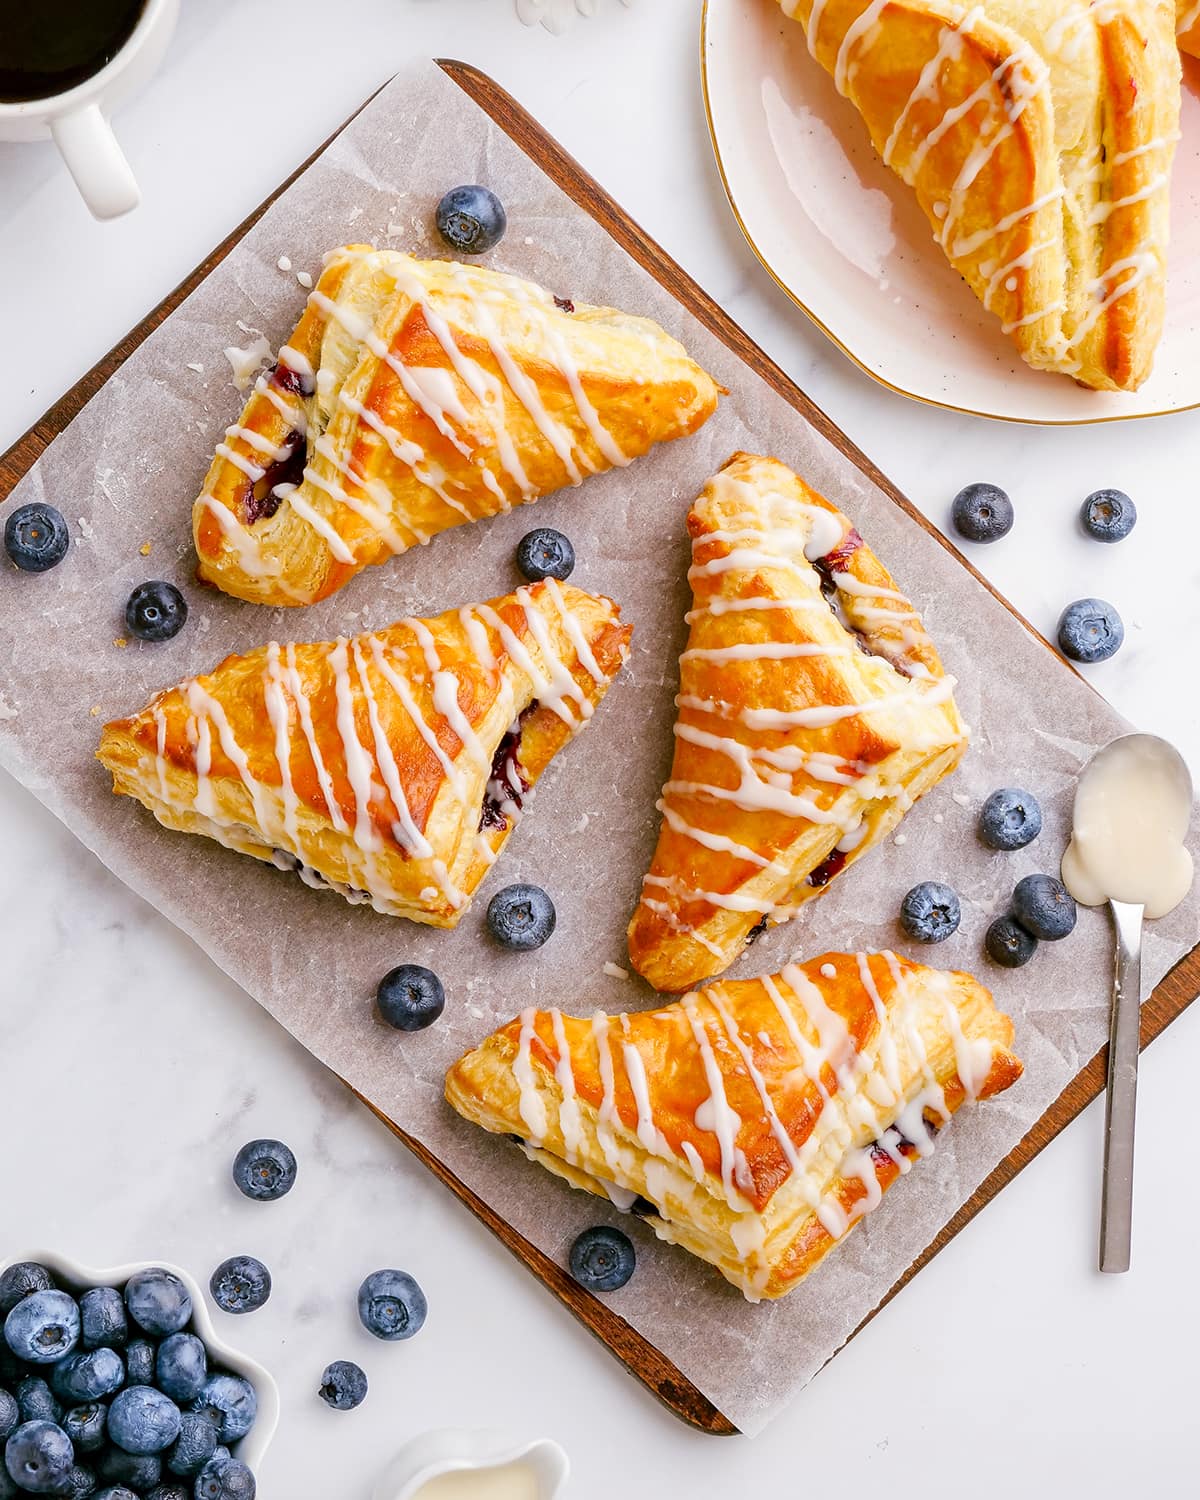 Four blueberry turnovers on a wooden tray, each drizzled with a powdered sugar glaze over the top.